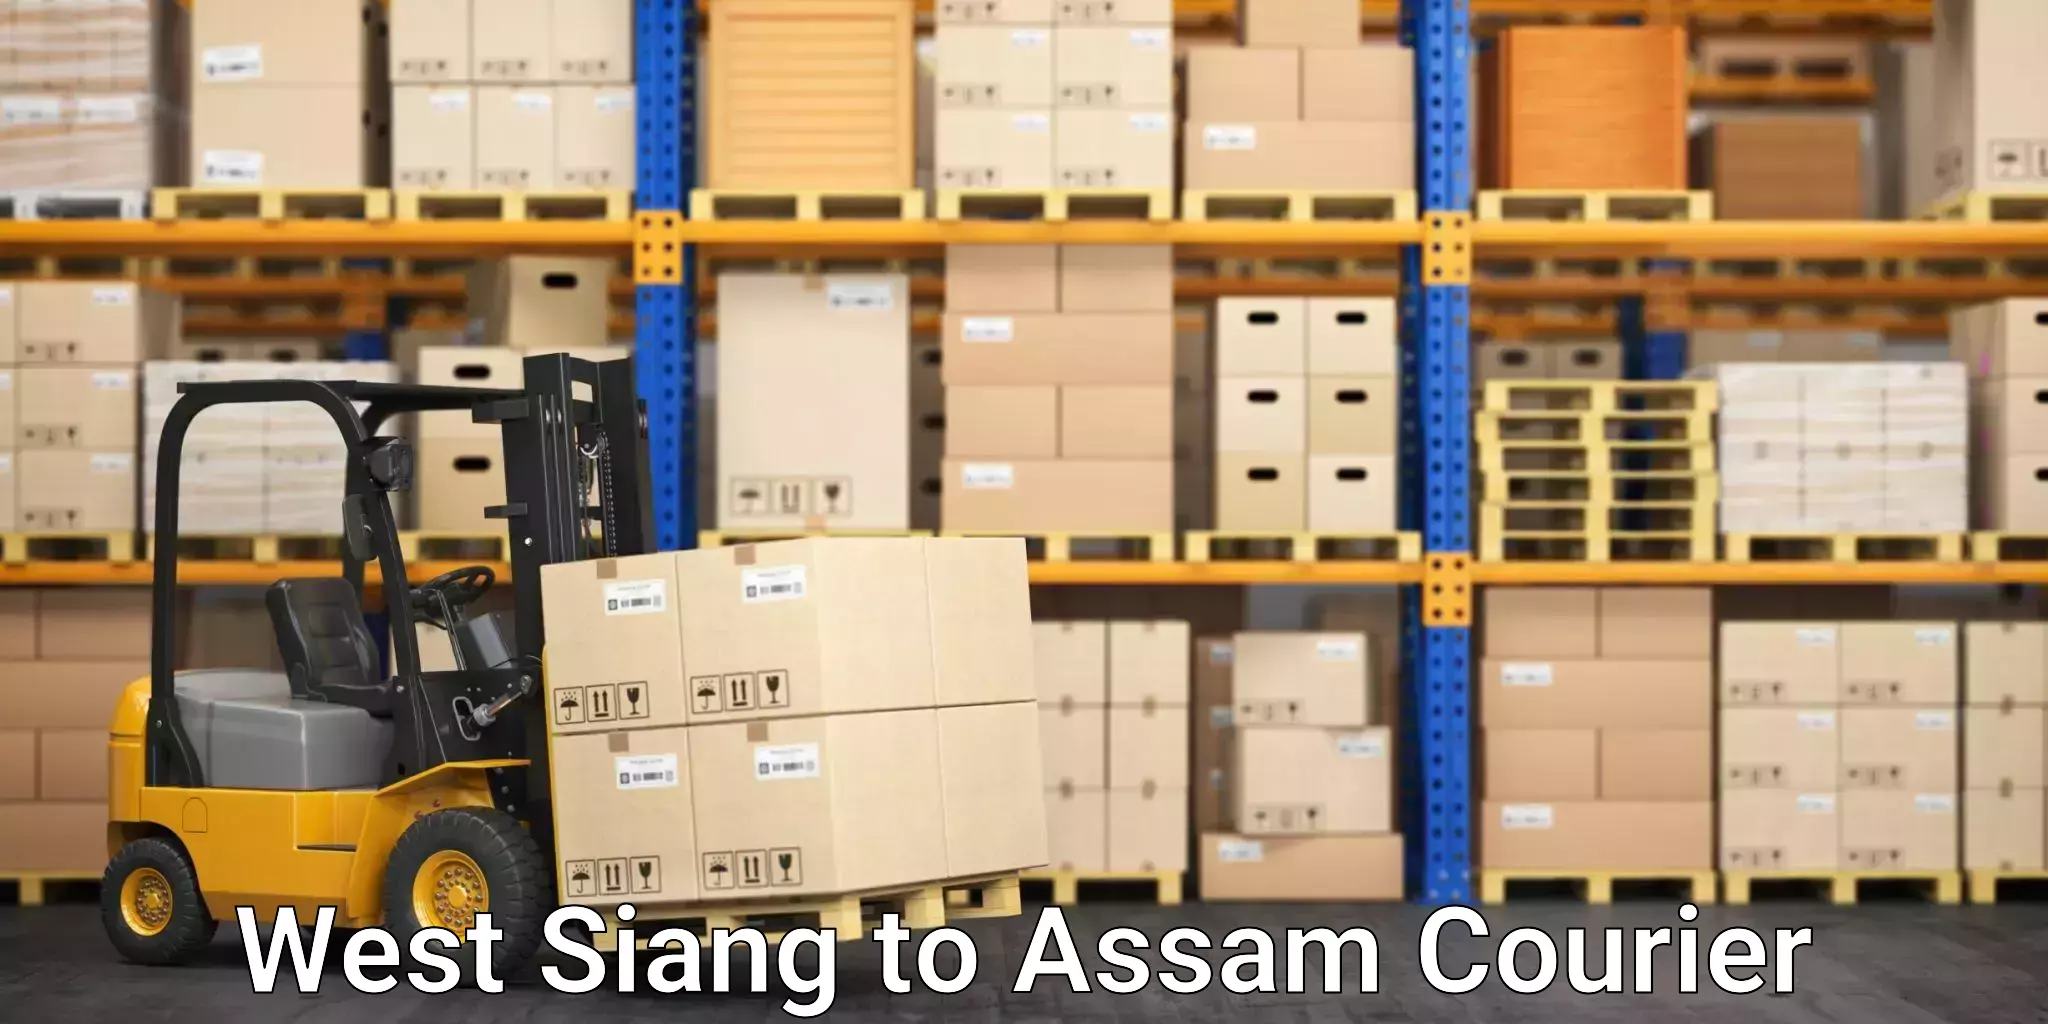 Comprehensive parcel tracking West Siang to Nagaon